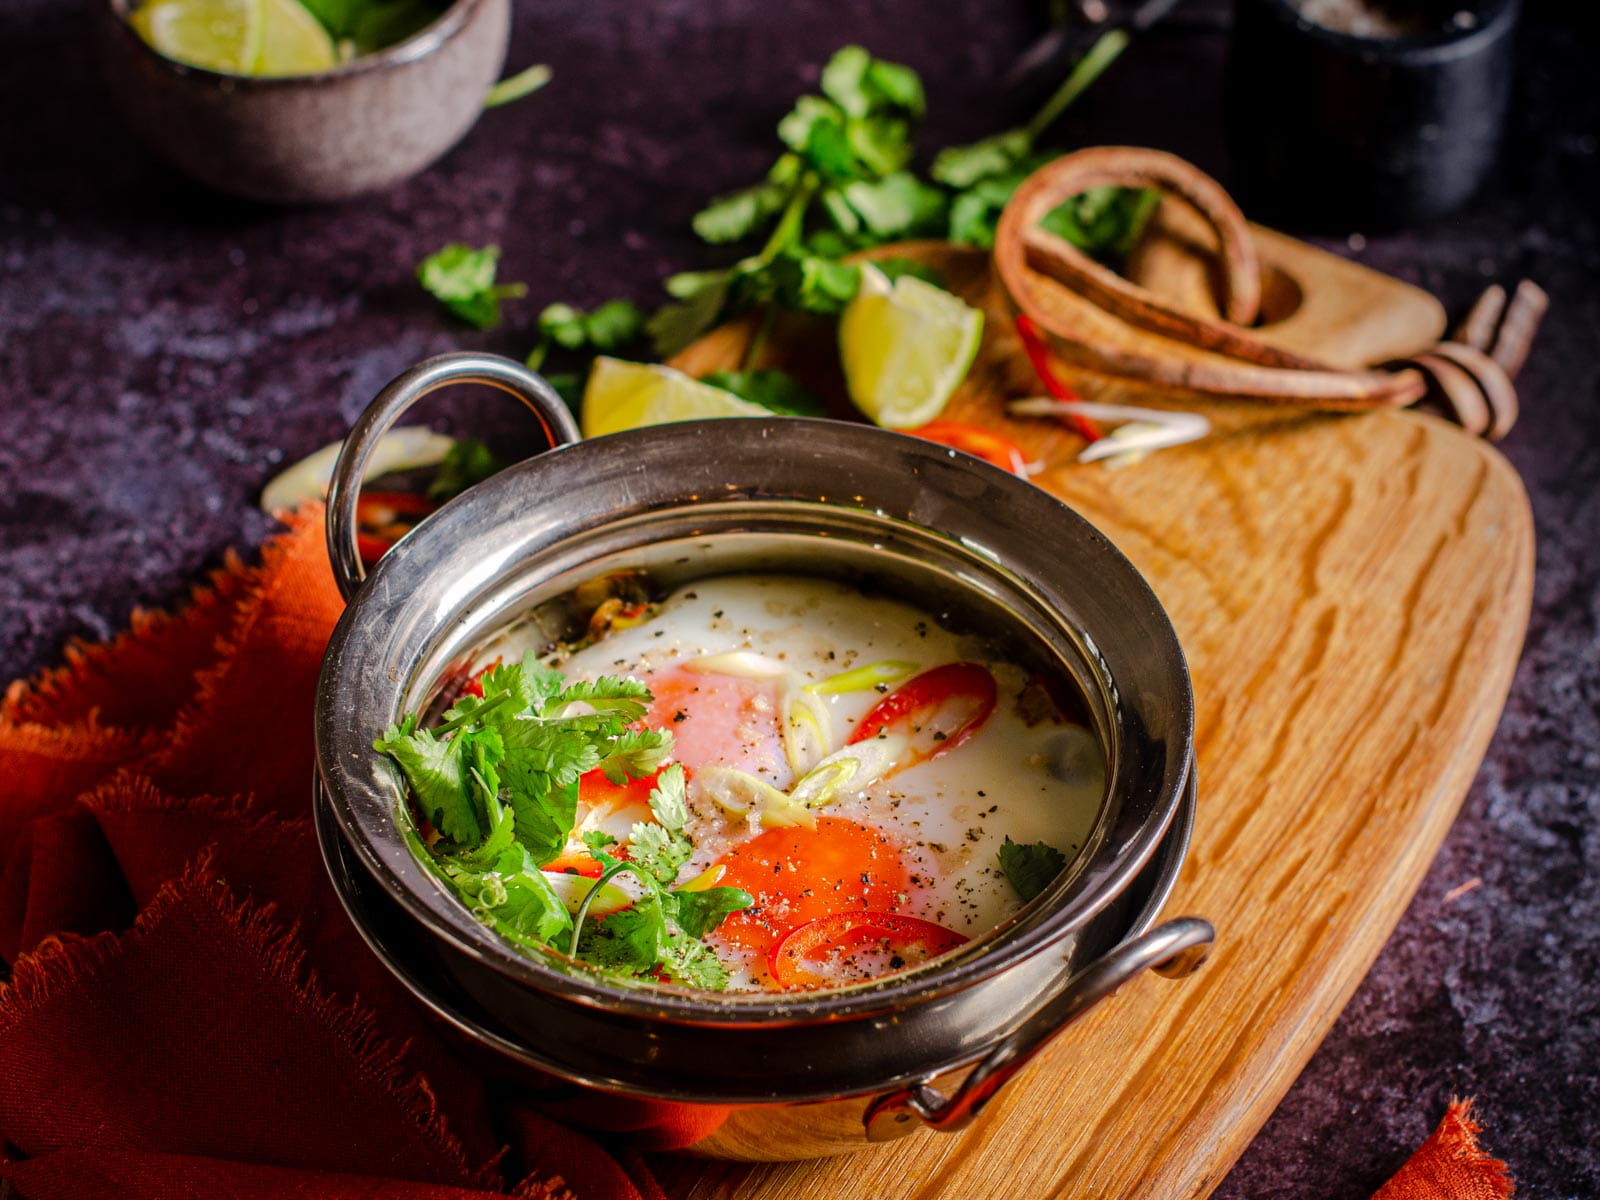 A dish of curried baked eggs, topped with fresh corriander, fresh slices of green onions and chillies served on a wooden board with an orange linen napkin.